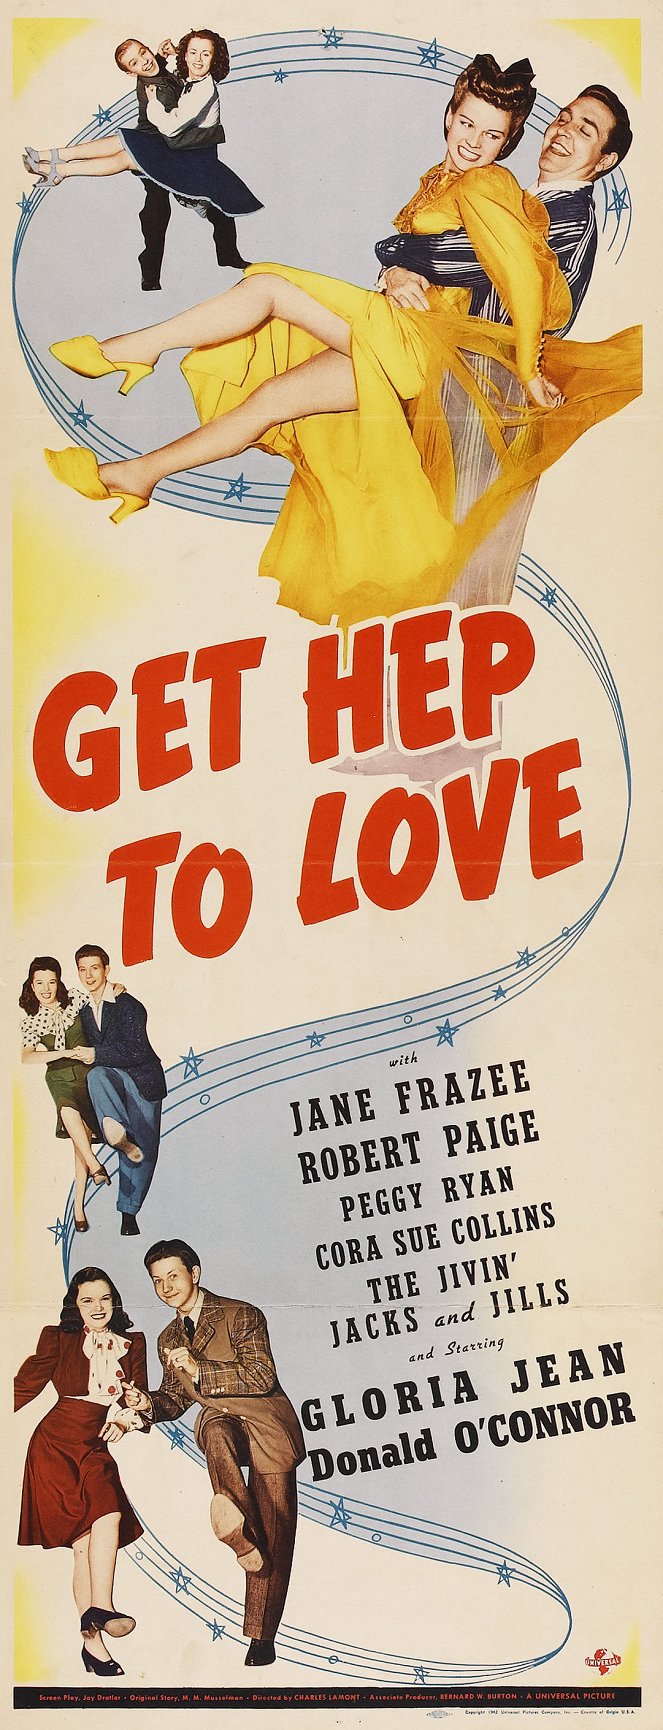 Get Hep to Love - Posters